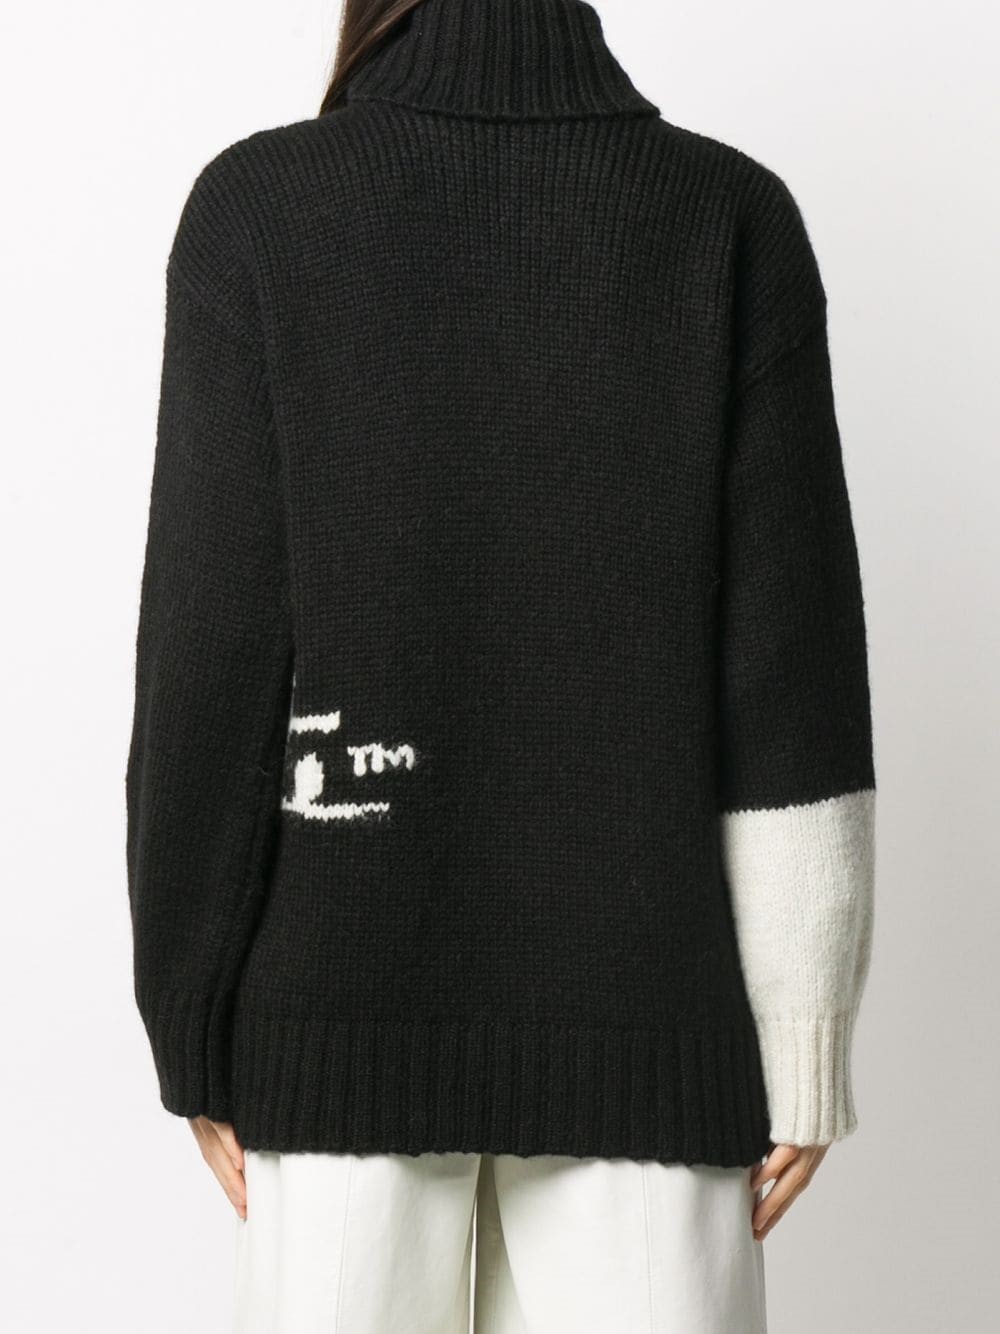 off-white LOGO PULLOVER available on montiboutique.com - 35256